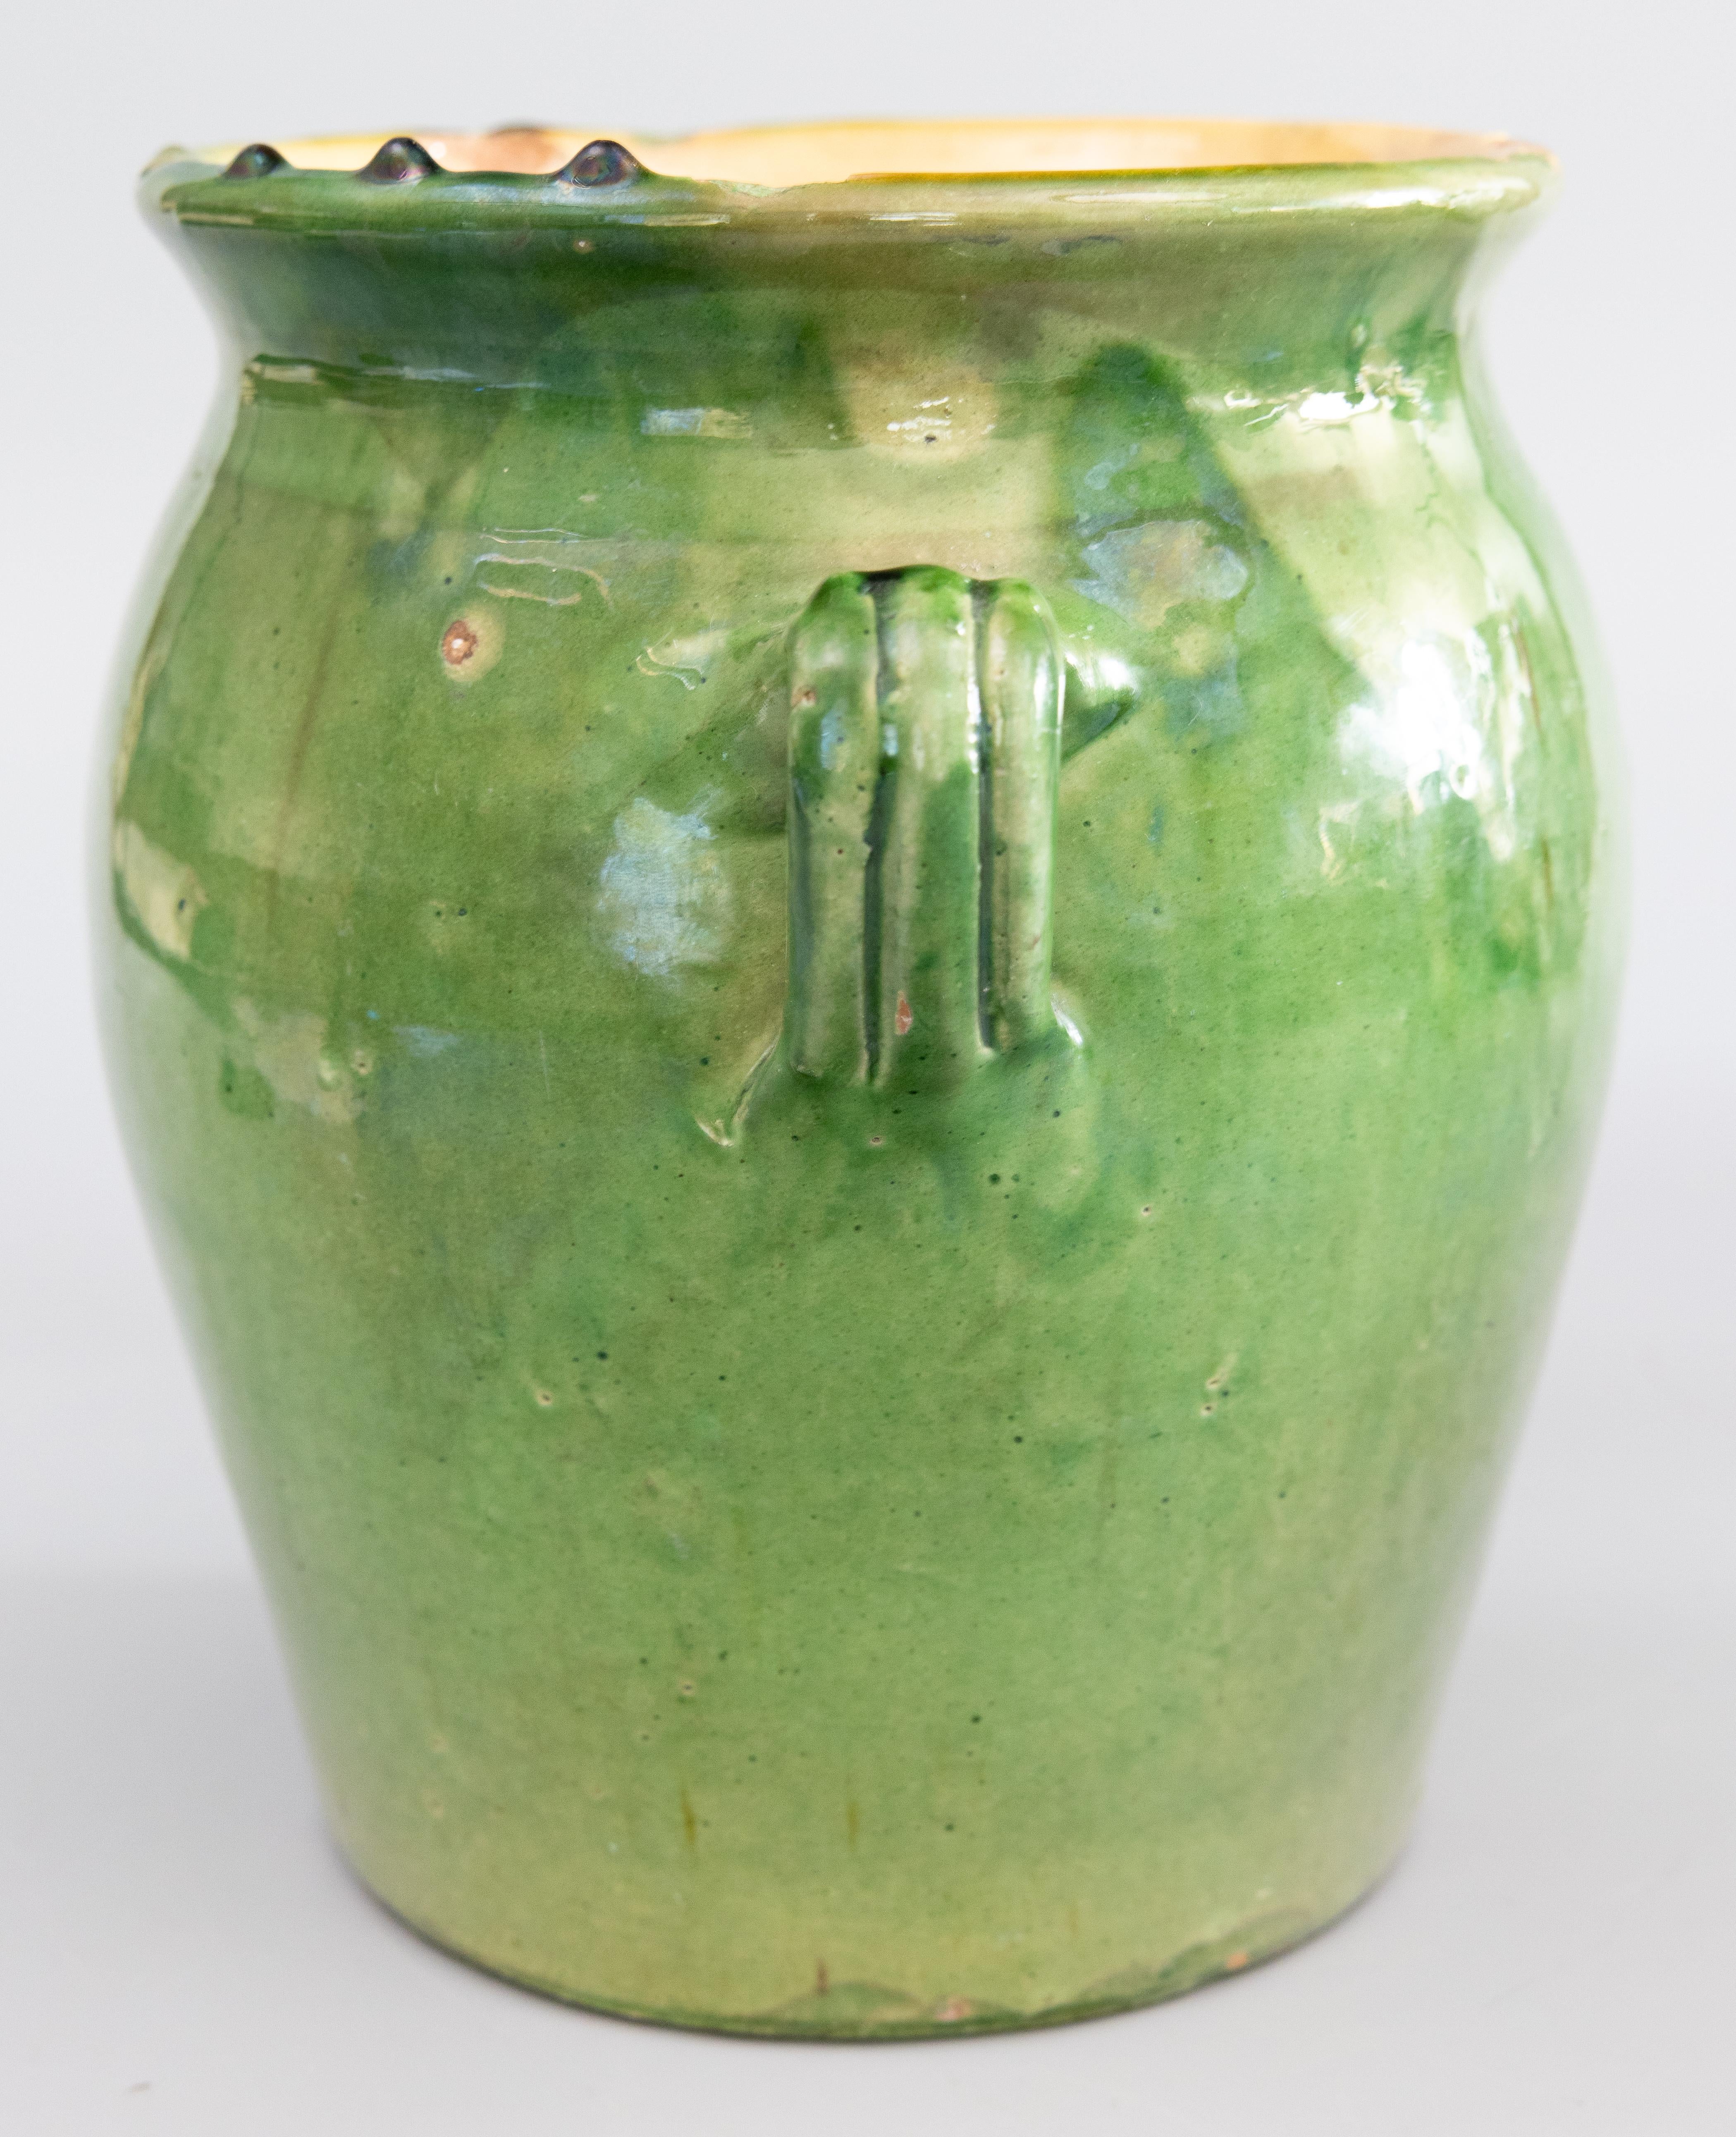 A superb 19th century French Provençal glazed terracotta confit pot / planter / urn / vase / cachepot / crock from Provence in southeastern France. This pot or planter is hand thrown with charming handles known as 'ears' with a lovely green exterior